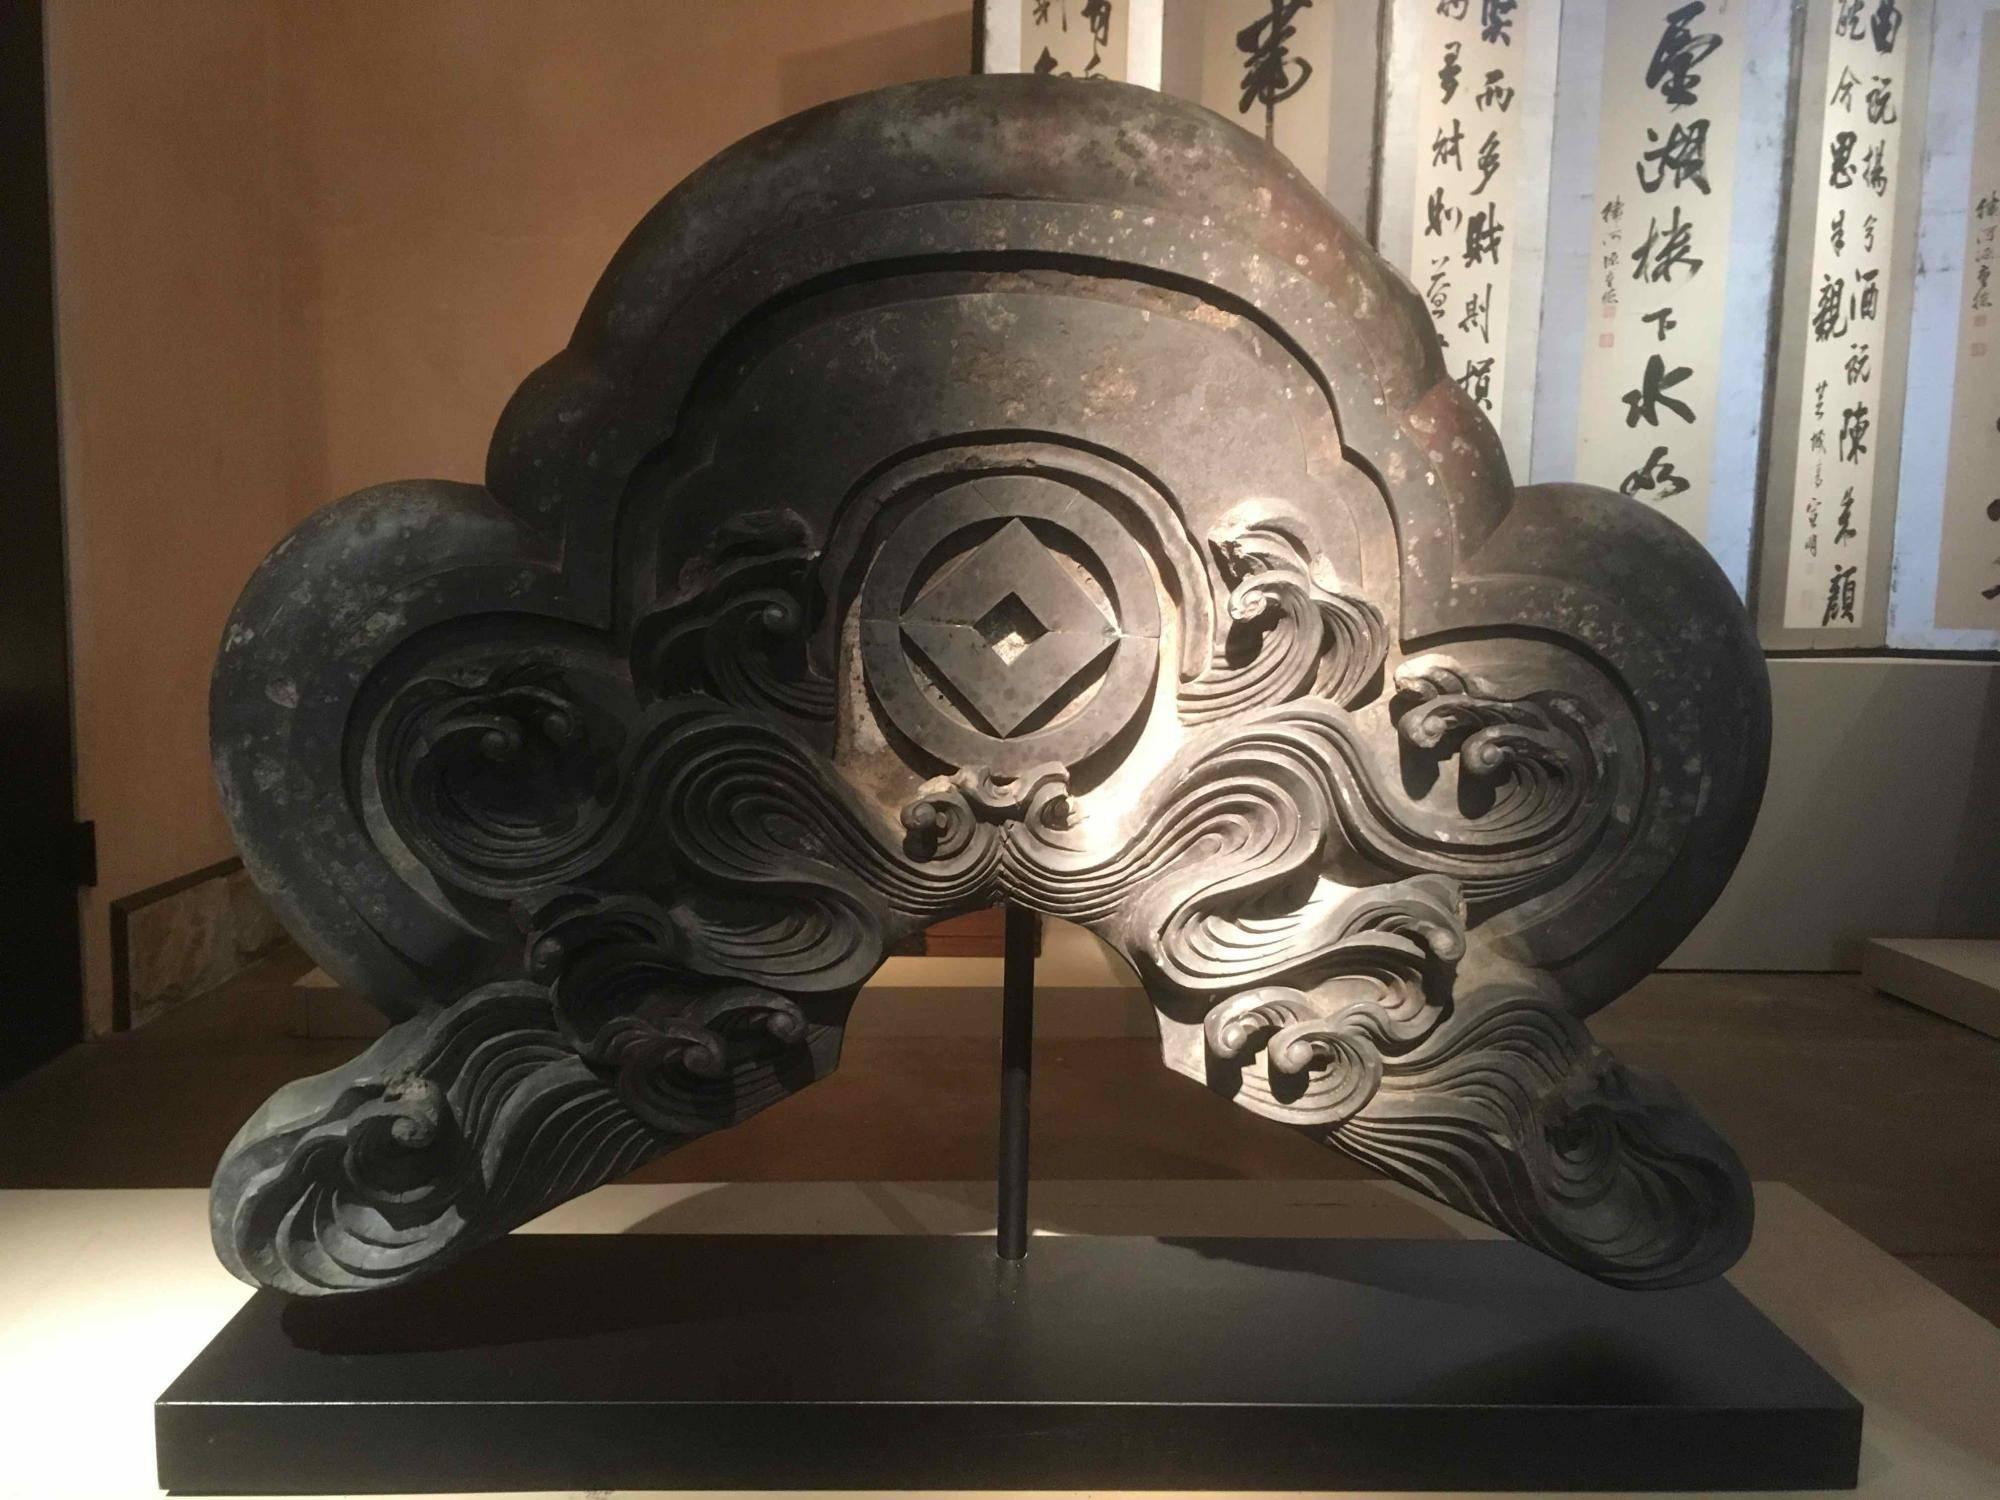 Large roof tile with custom stand
Material: Clay 
Origin: Japan
Age: Late Meiji period, circa 1890
Size: 34